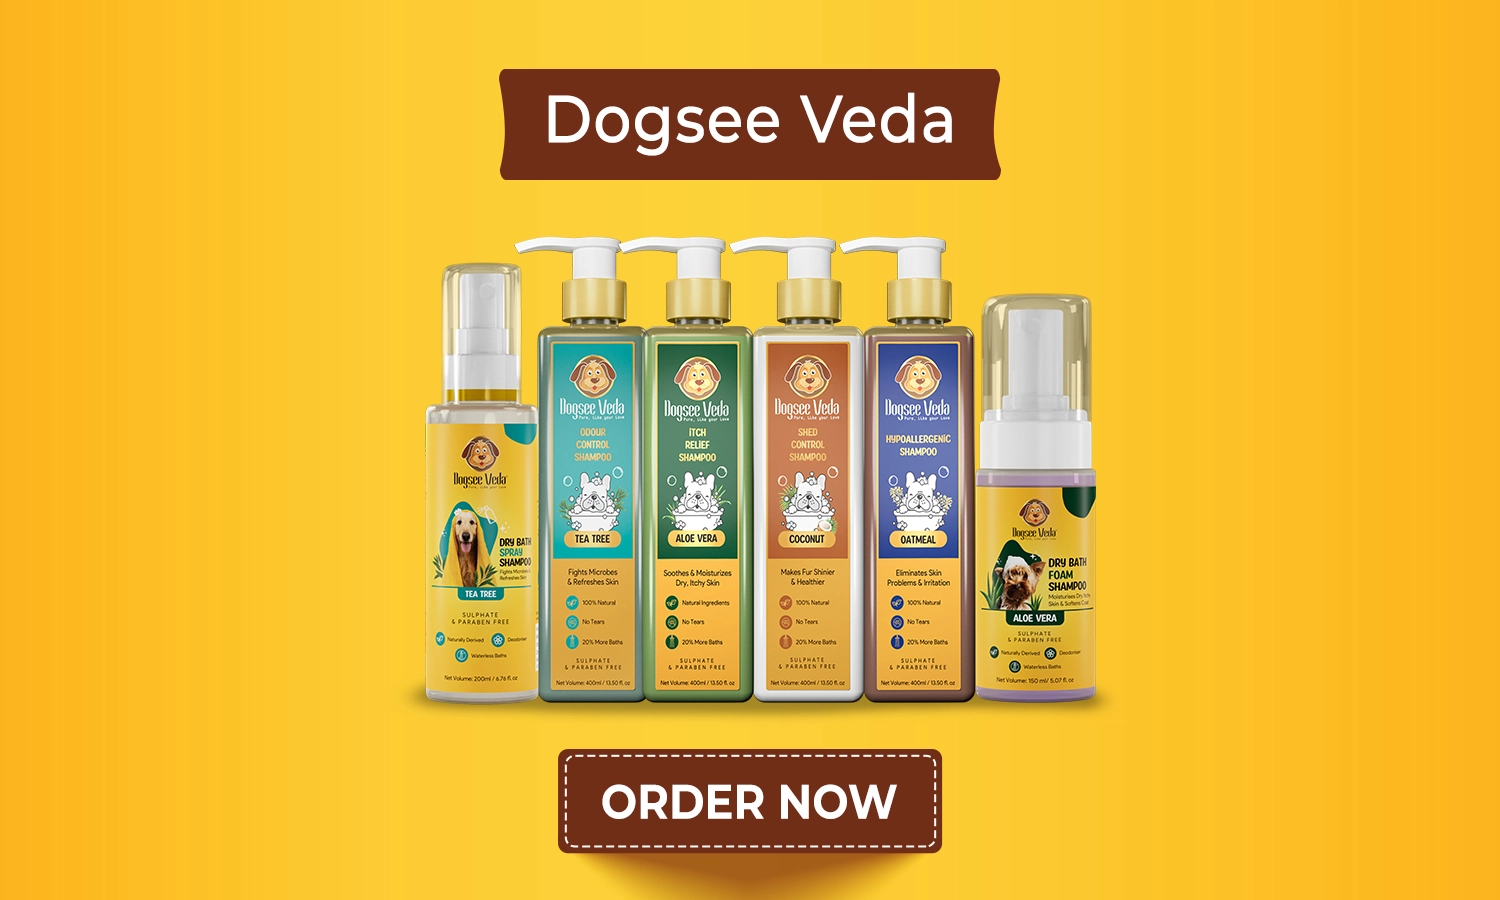 Dogsee Veda